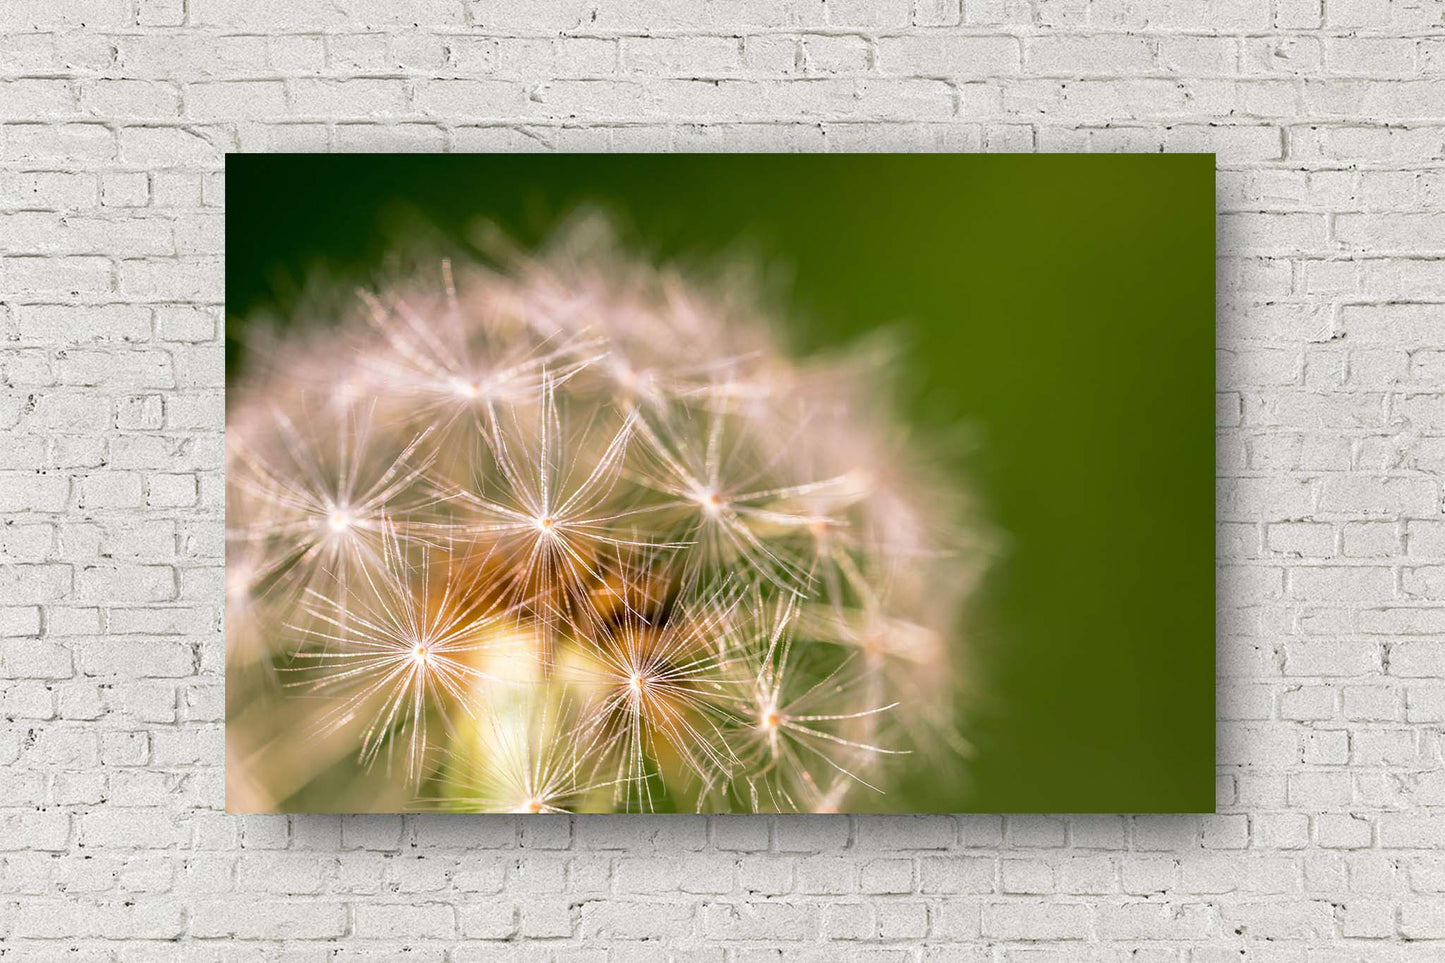 Botanical metal print of a dandelion head against a green background on a spring day in Oklahoma by Sean Ramsey of Southern Plains Photography.